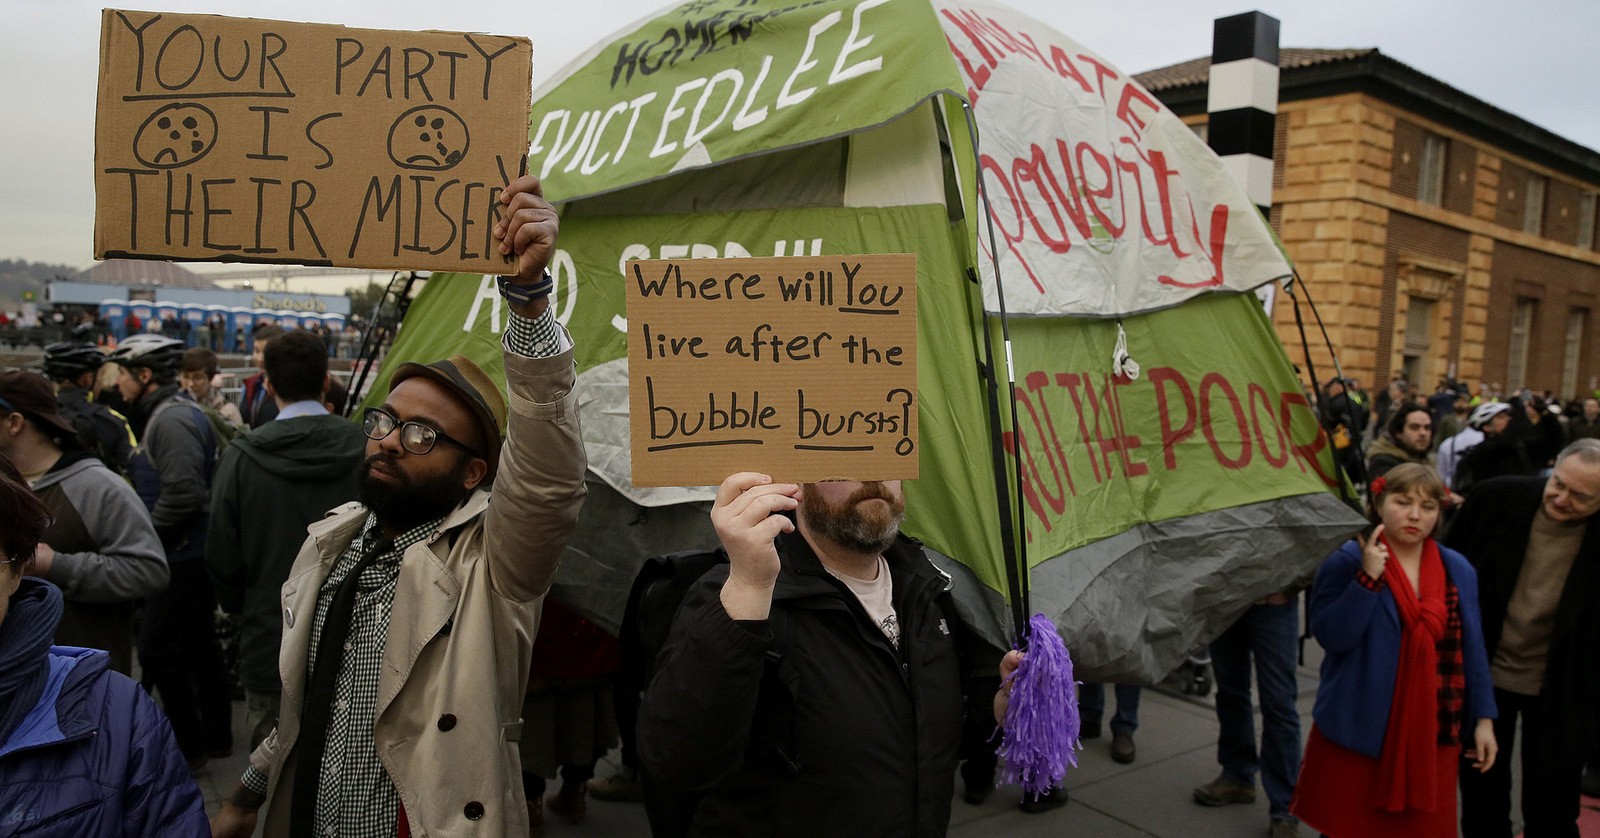 In this Feb. 3, 2016 photo, people hold up signs and a tent during a protest to demand city officials do more to help homeless people. (AP/Eric Risberg)